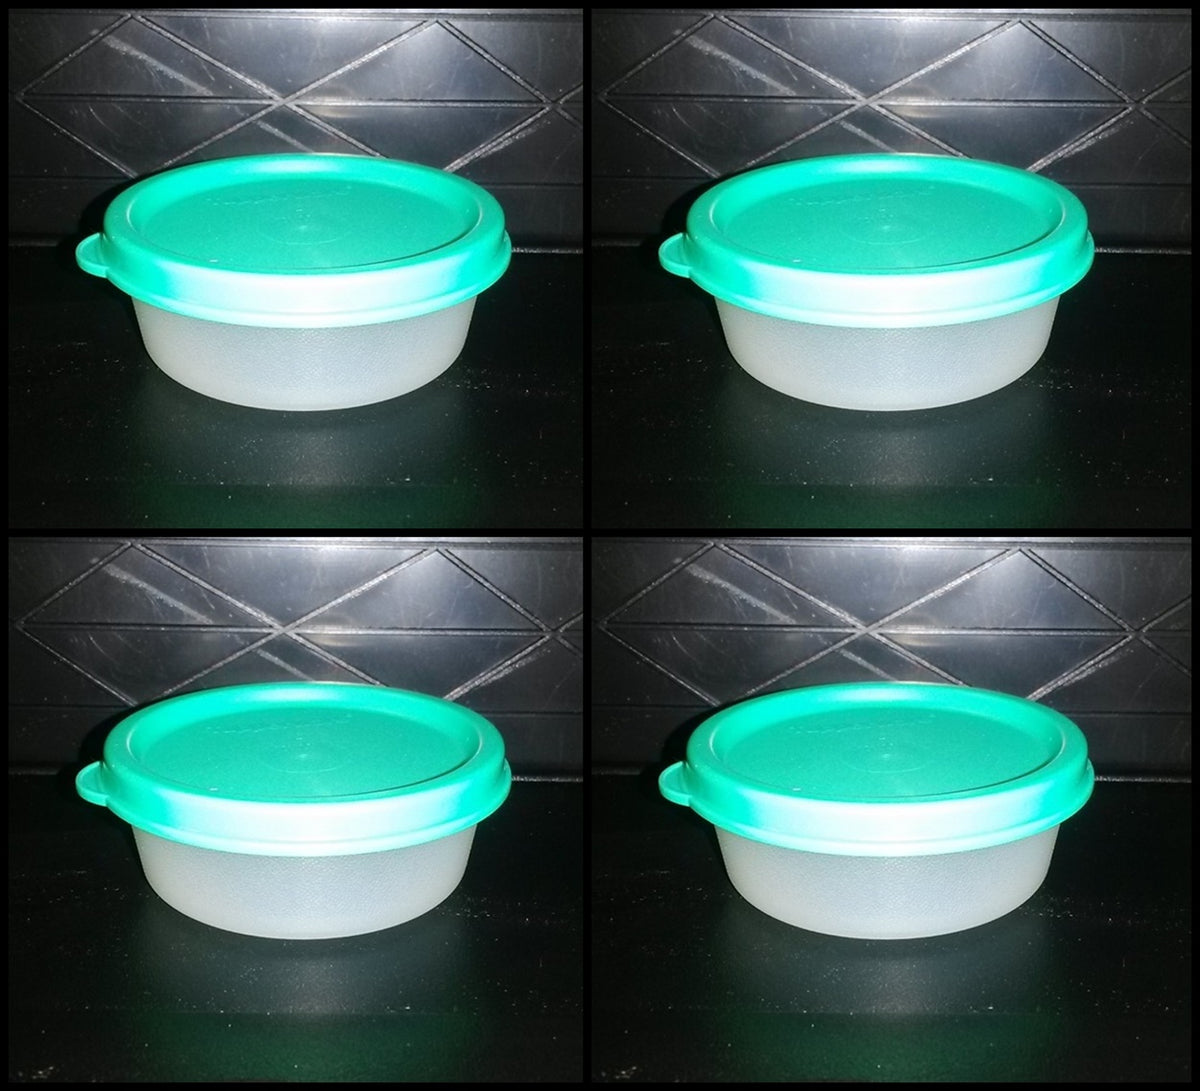 Tupperware 4 Ounce Snack Cups Set of 2 with Mint Green Seals